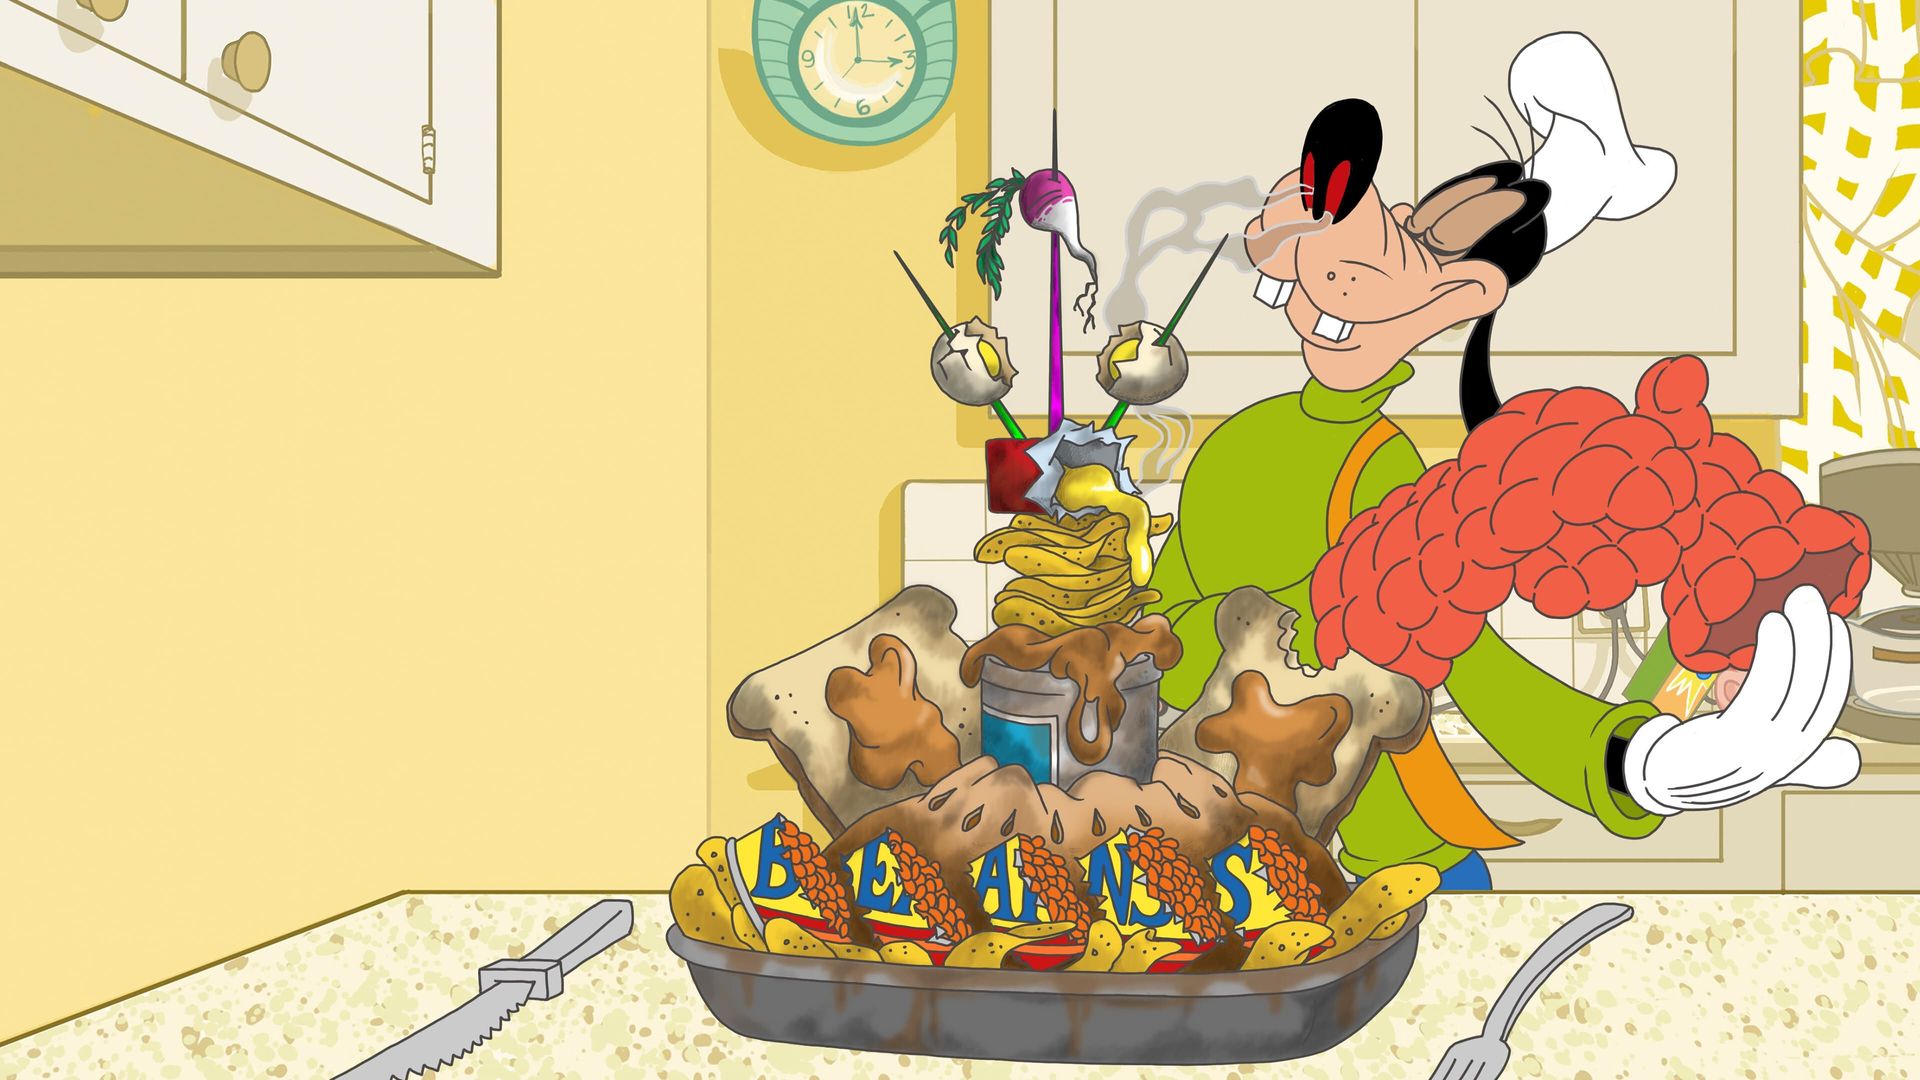 Disney Presents Goofy in How to Stay at Home Backdrop